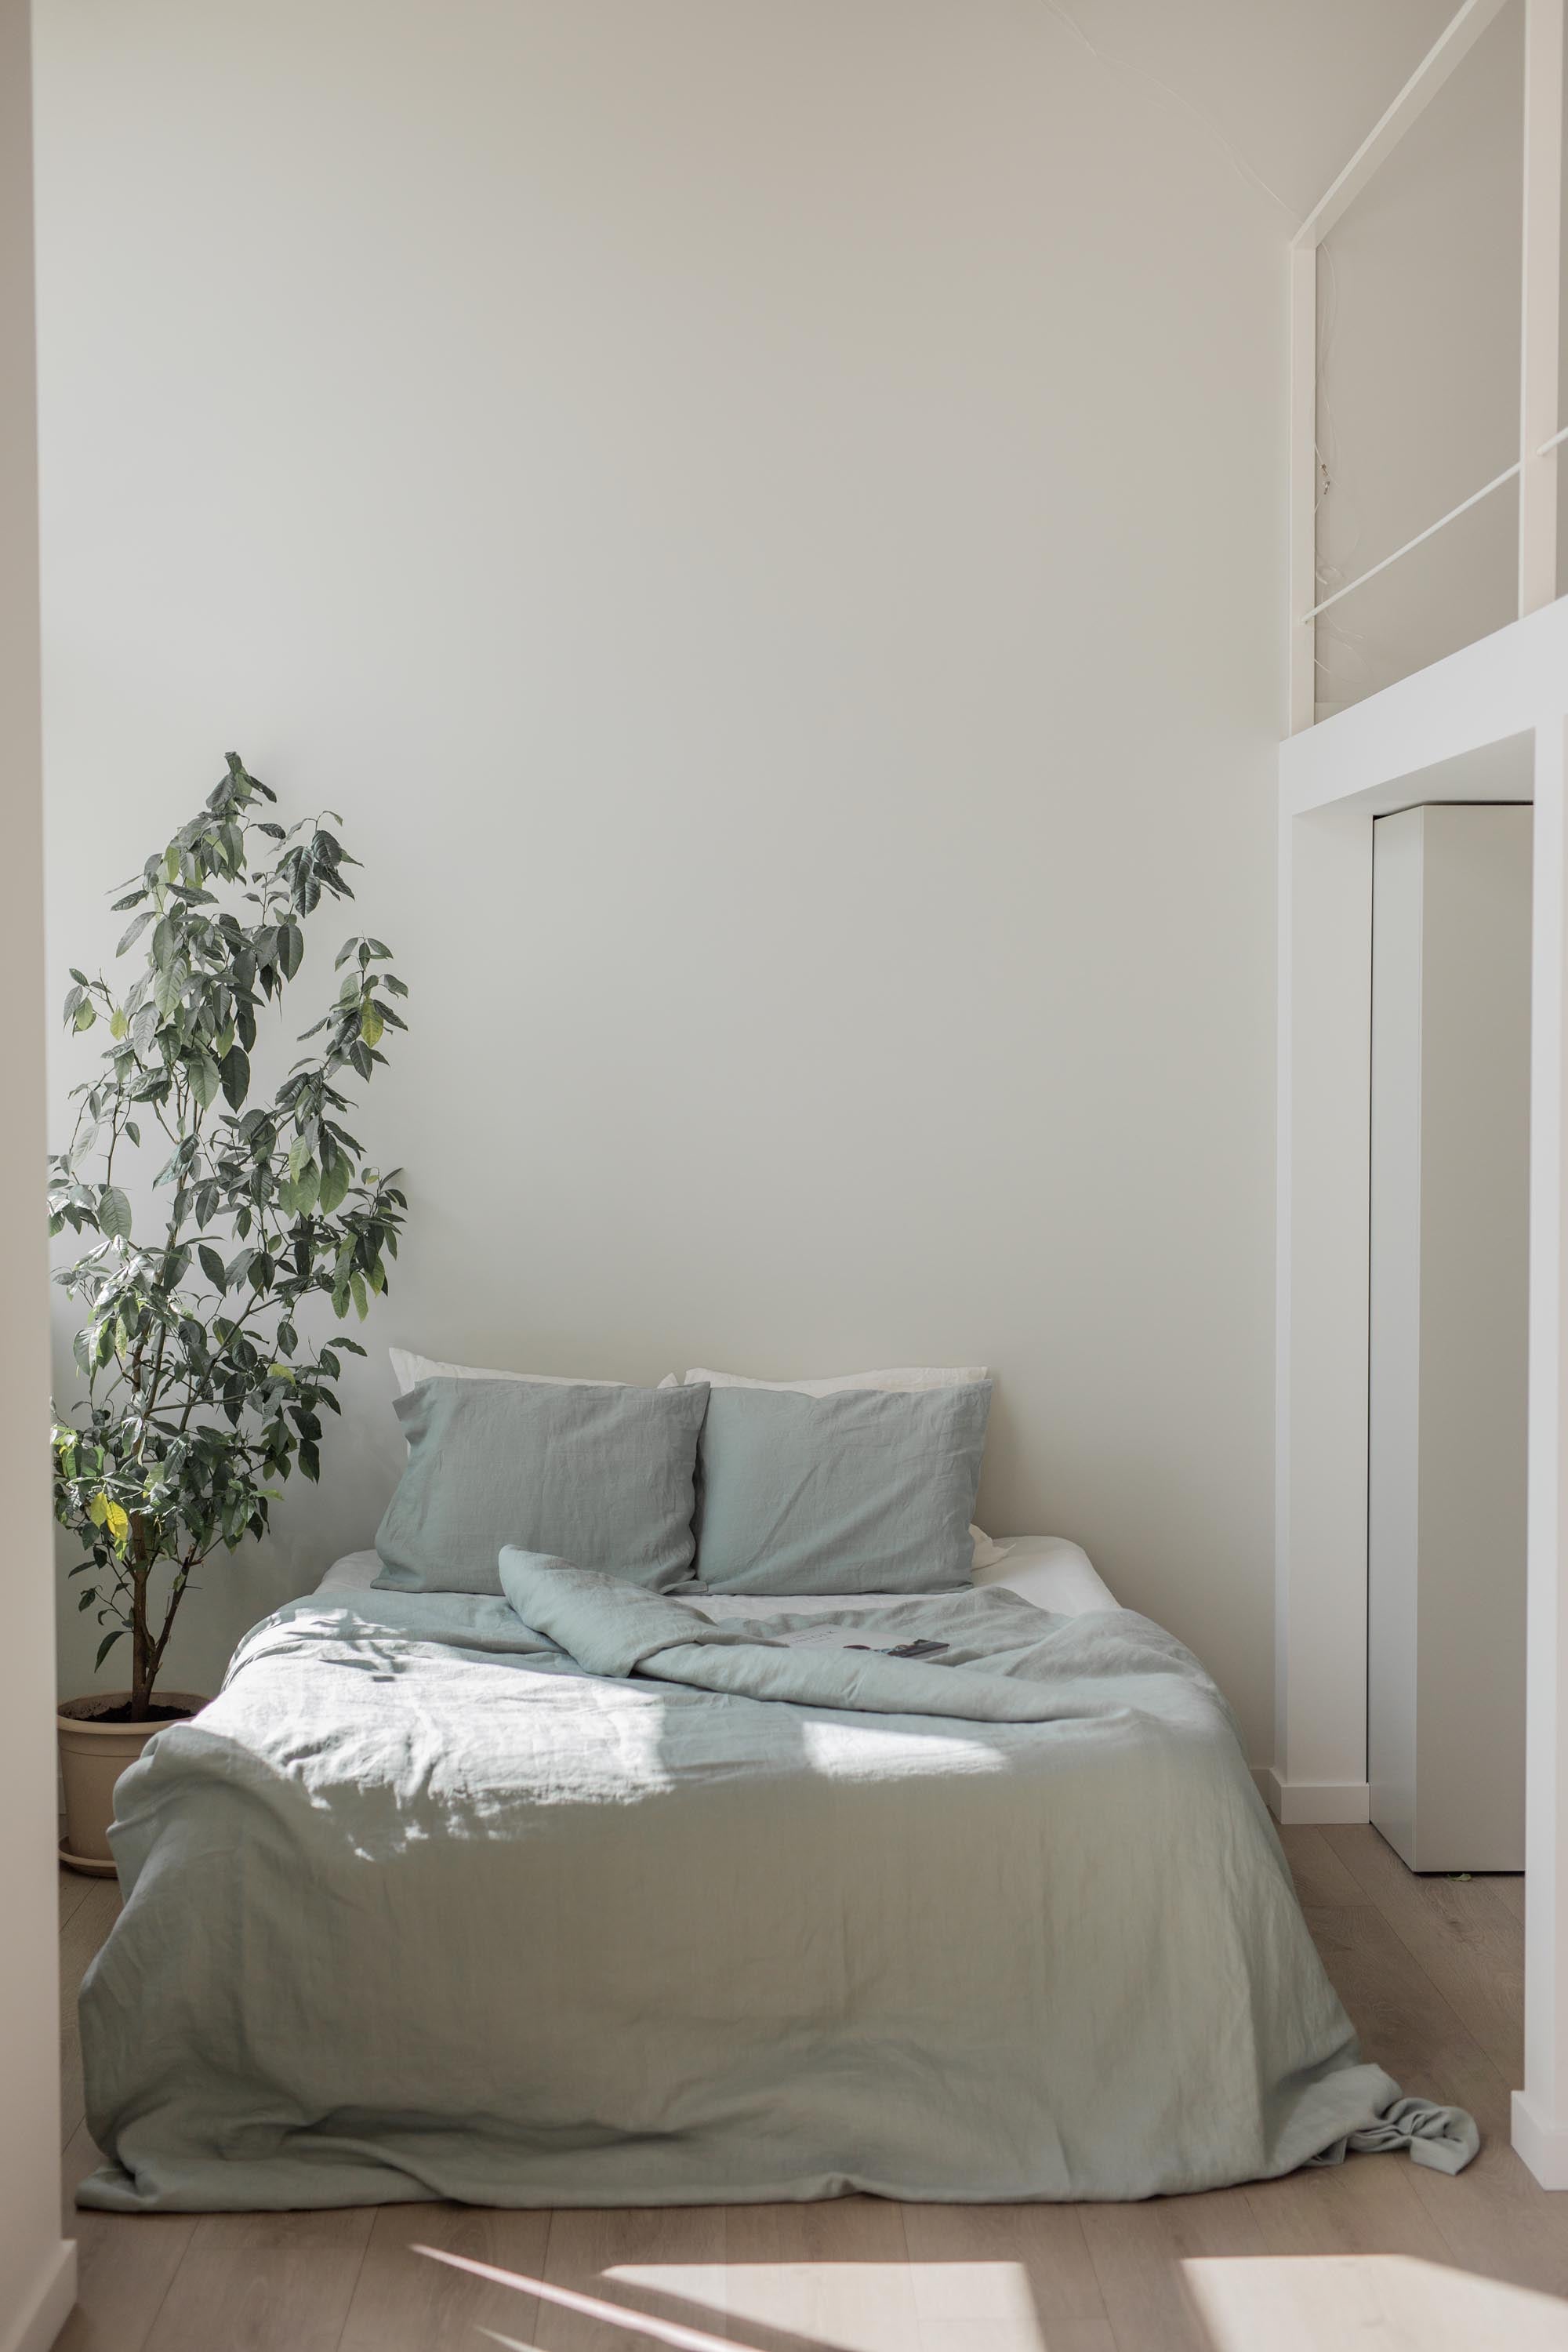 Undone Bed With Sage Green Linen Duvet Cover By AmourlInen